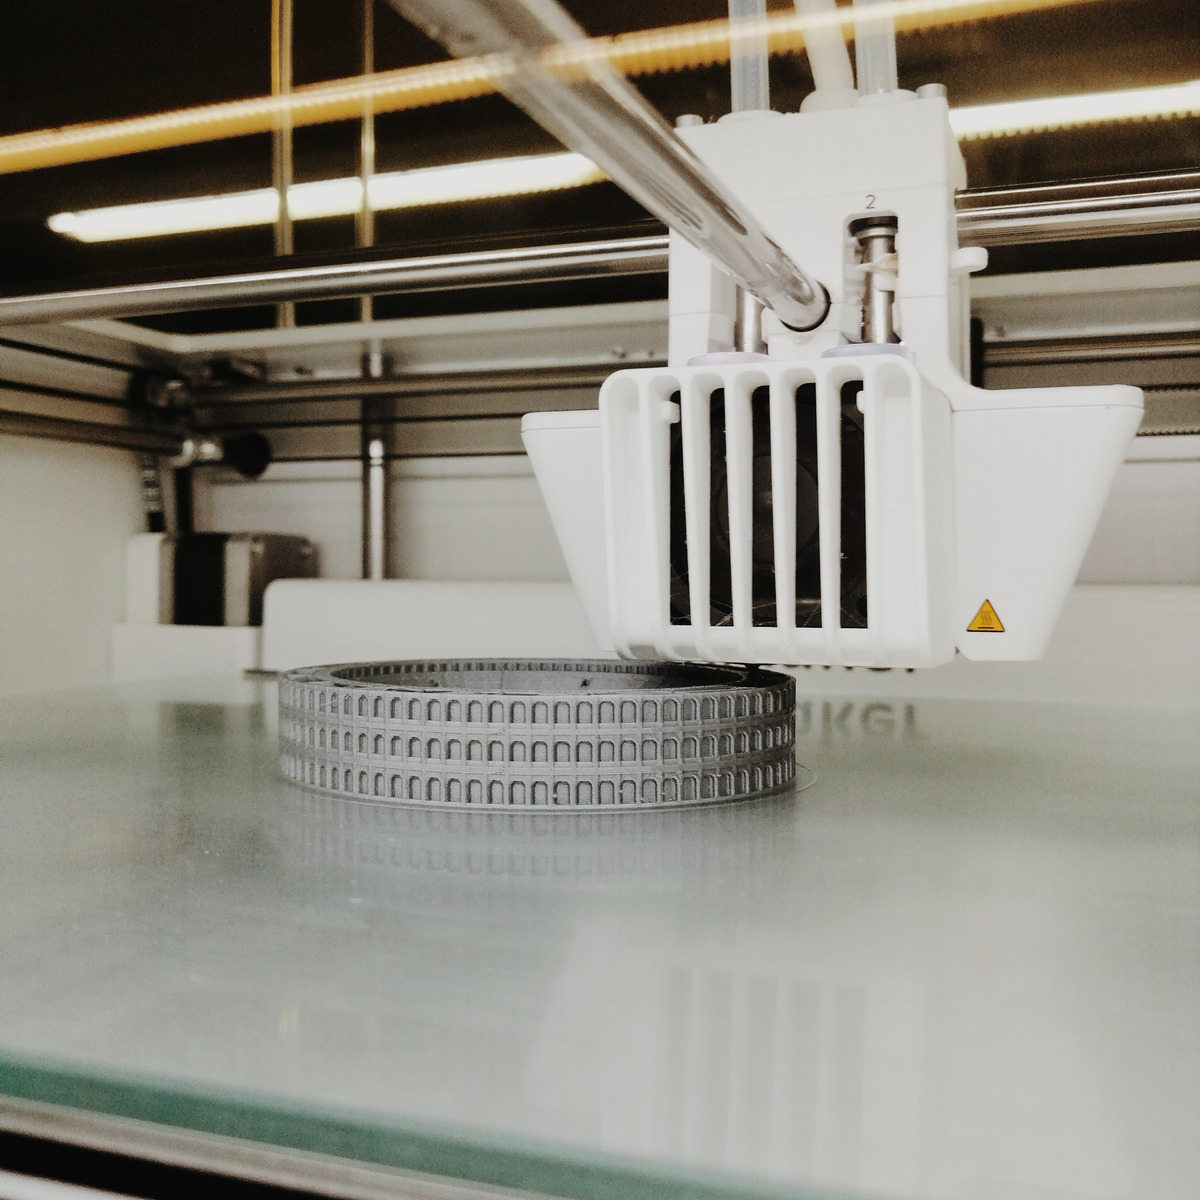 Manufacturing Risk Insights: 3-D Printing